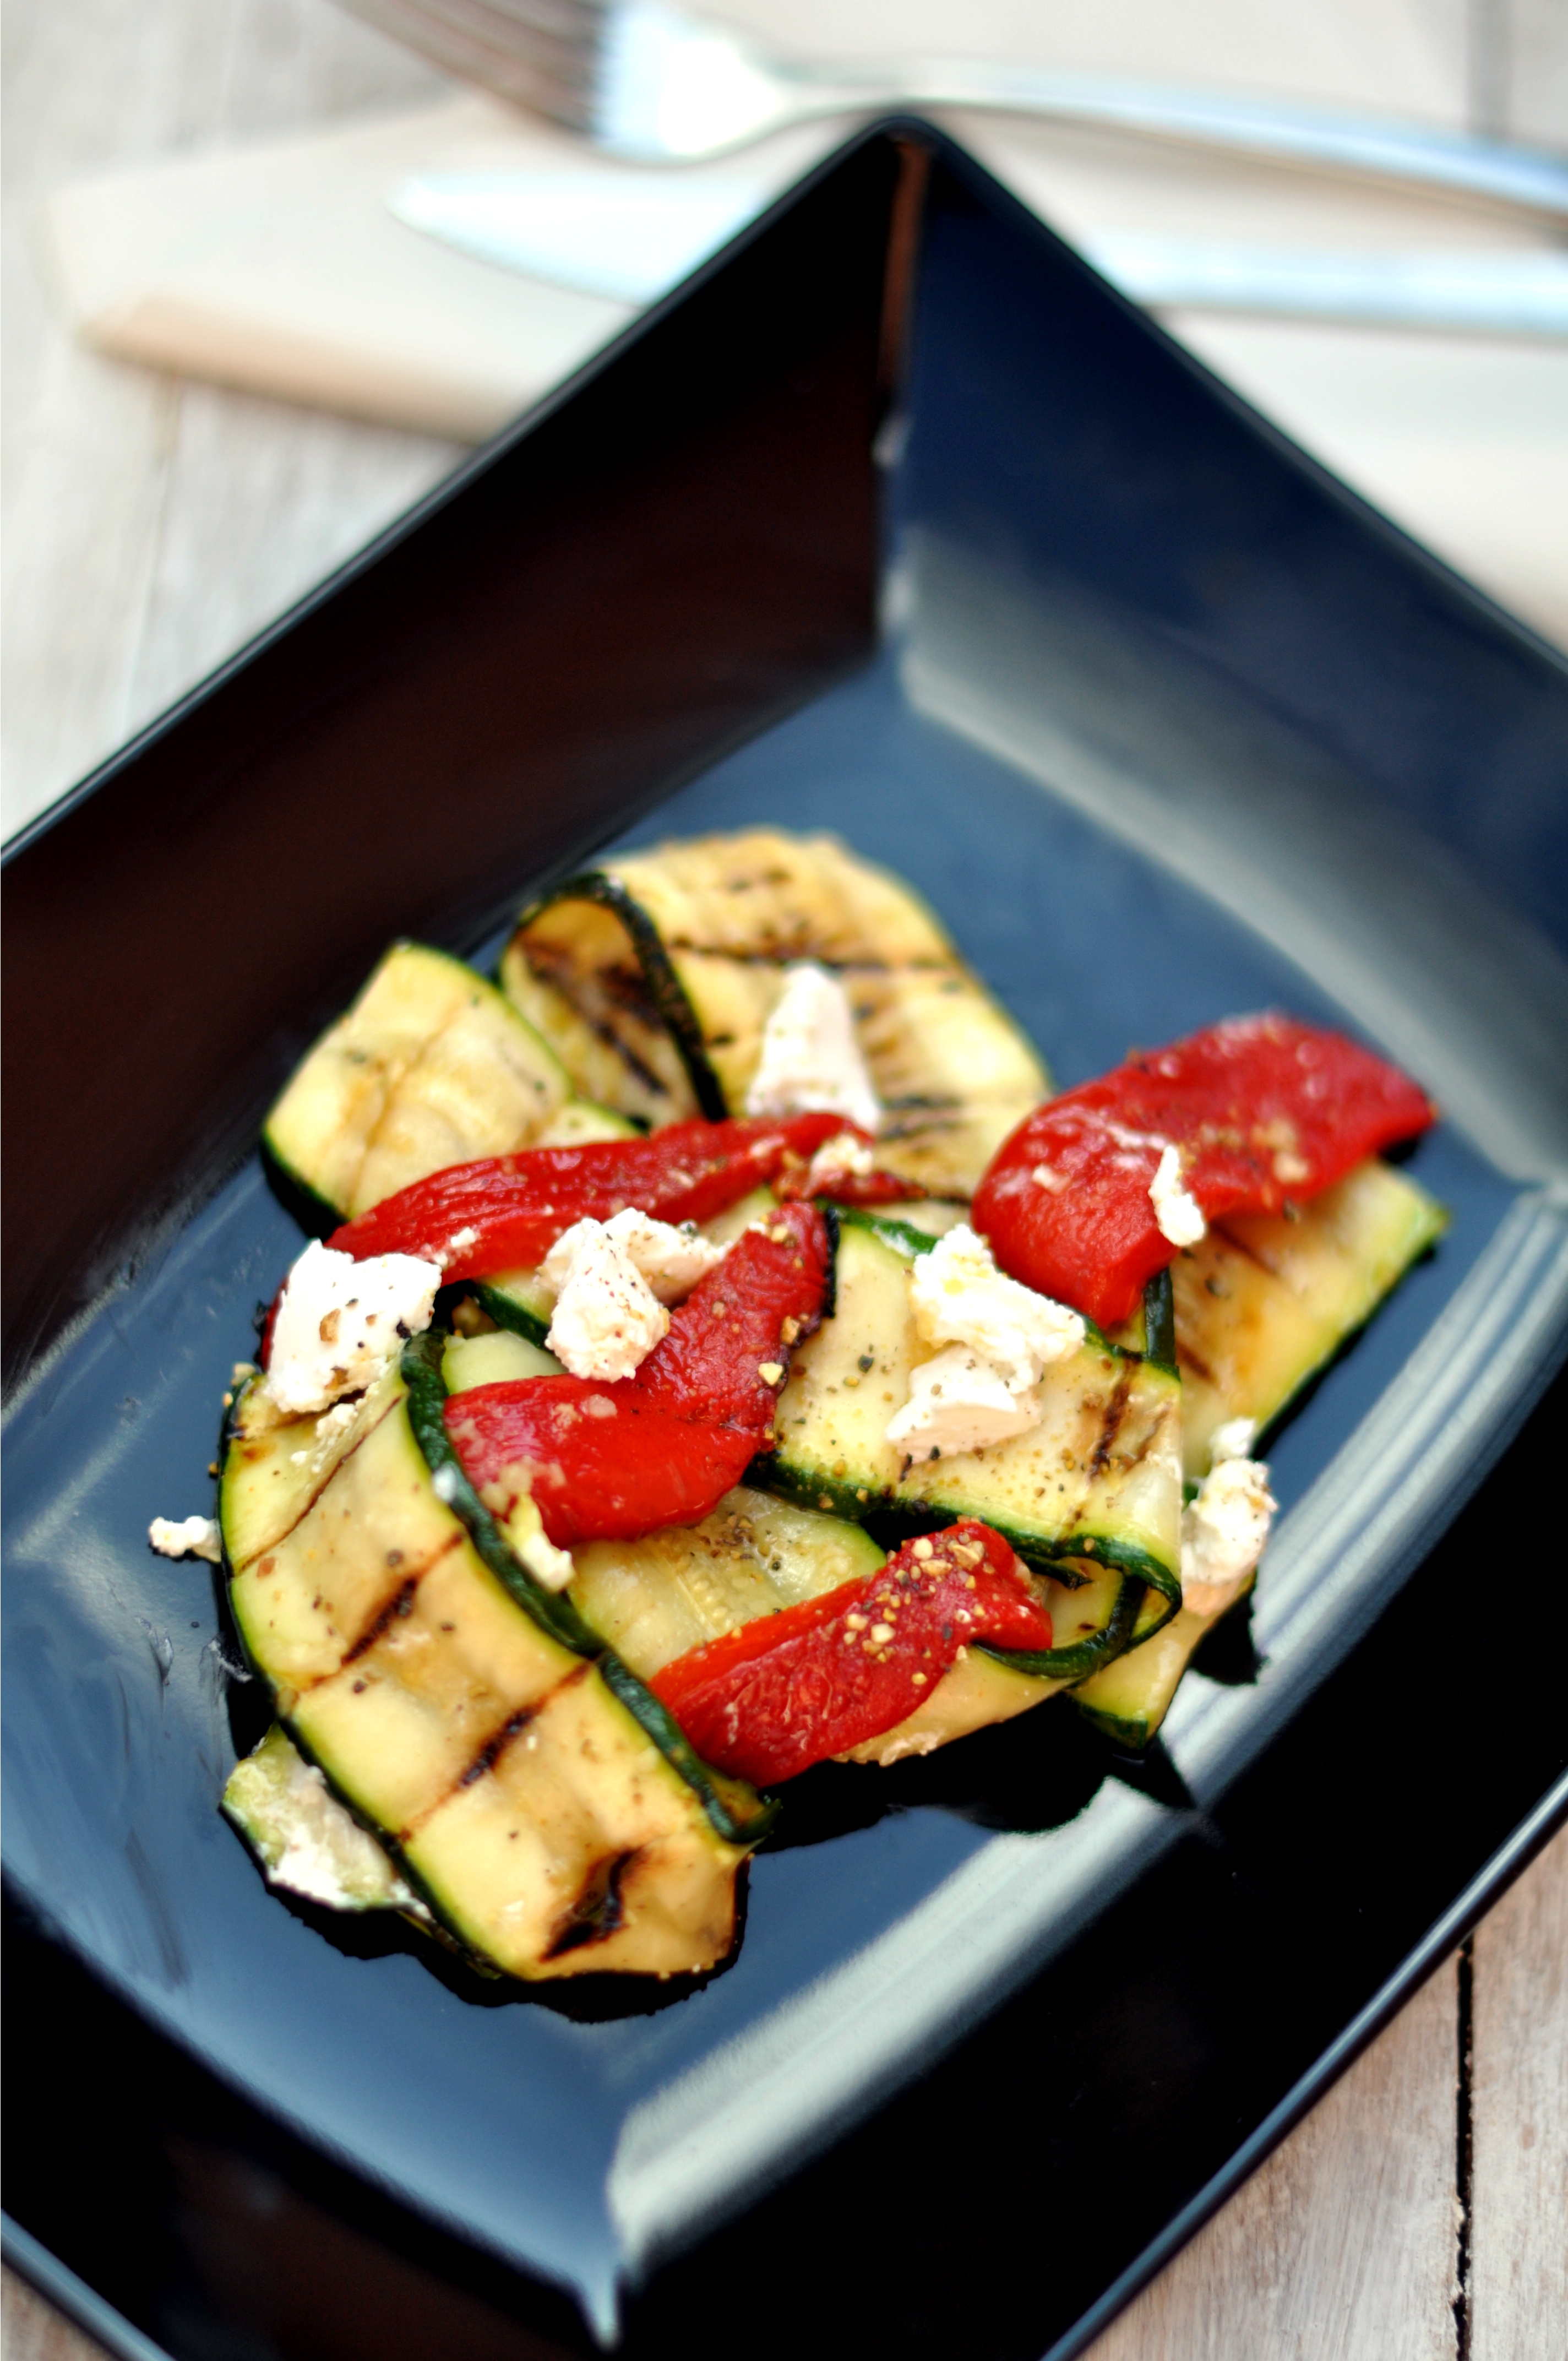 Marinated zucchini and bell pepper salad